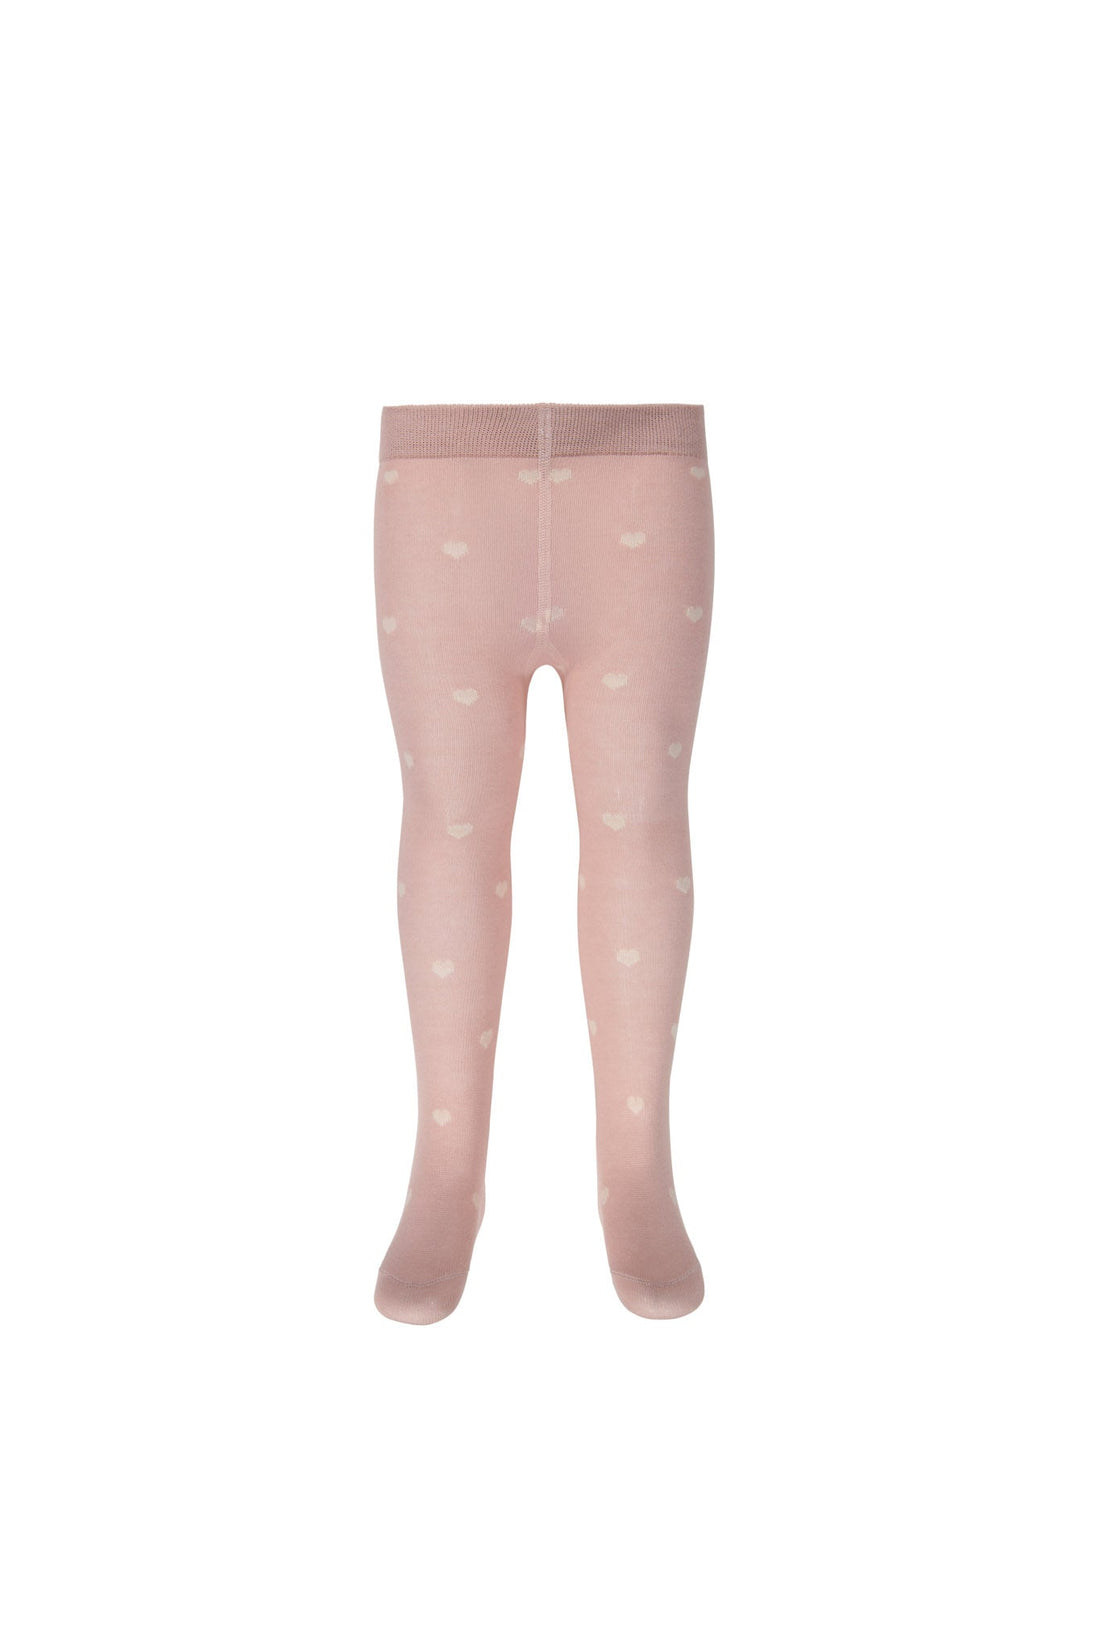 Jacquard Heart Tight - Mon Amour Rose Childrens Tight from Jamie Kay USA